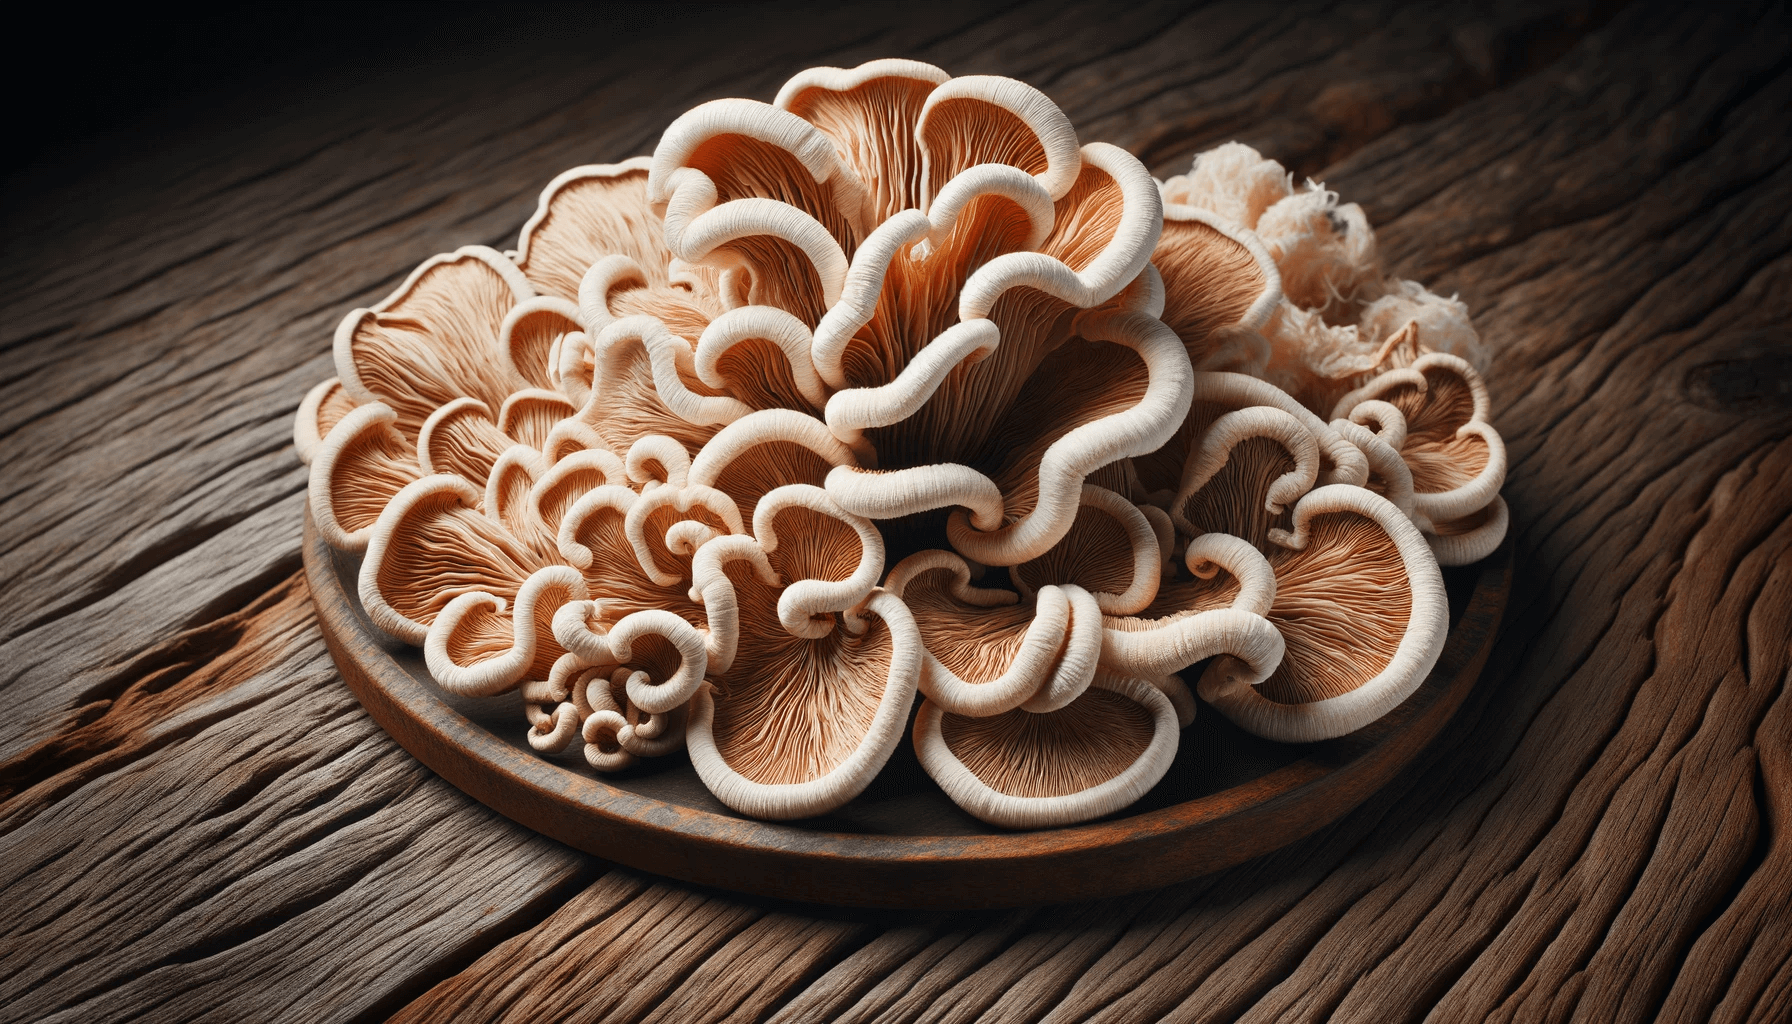 An arrangement of dried Lion's Mane mushroom slices on a rustic wooden surface, capturing the highly detailed and realistic texture as seen in the provided image.